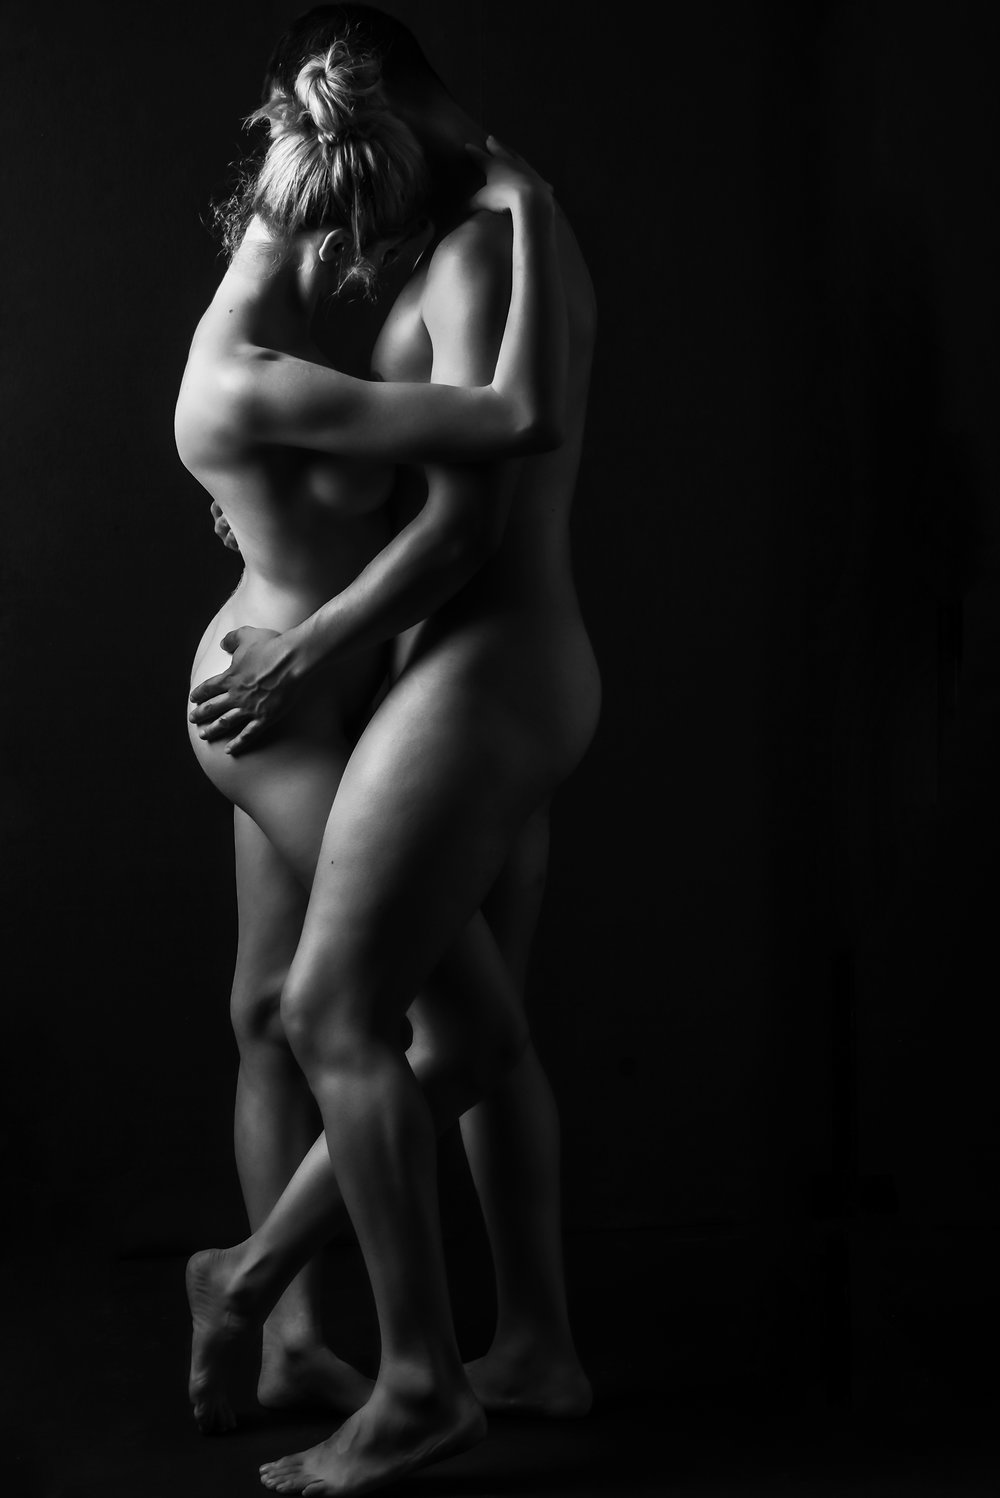 Sexy nude couples pictures - Hot Nude